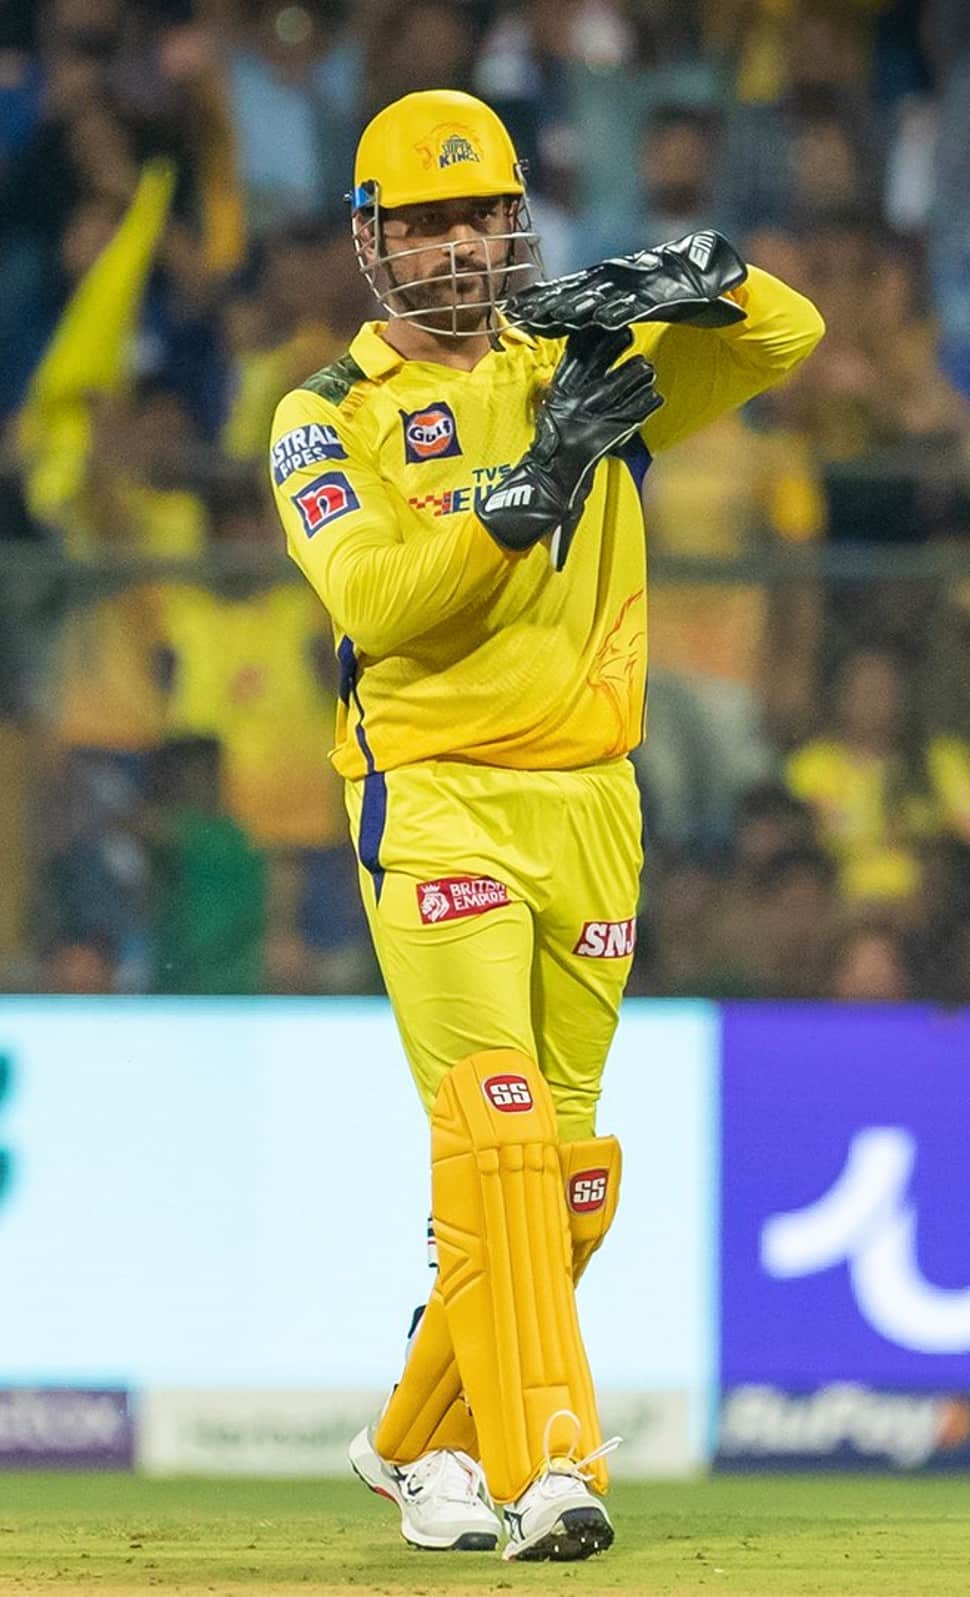 Top 999+ csk ms dhoni images – Amazing Collection csk ms dhoni images Full 4K